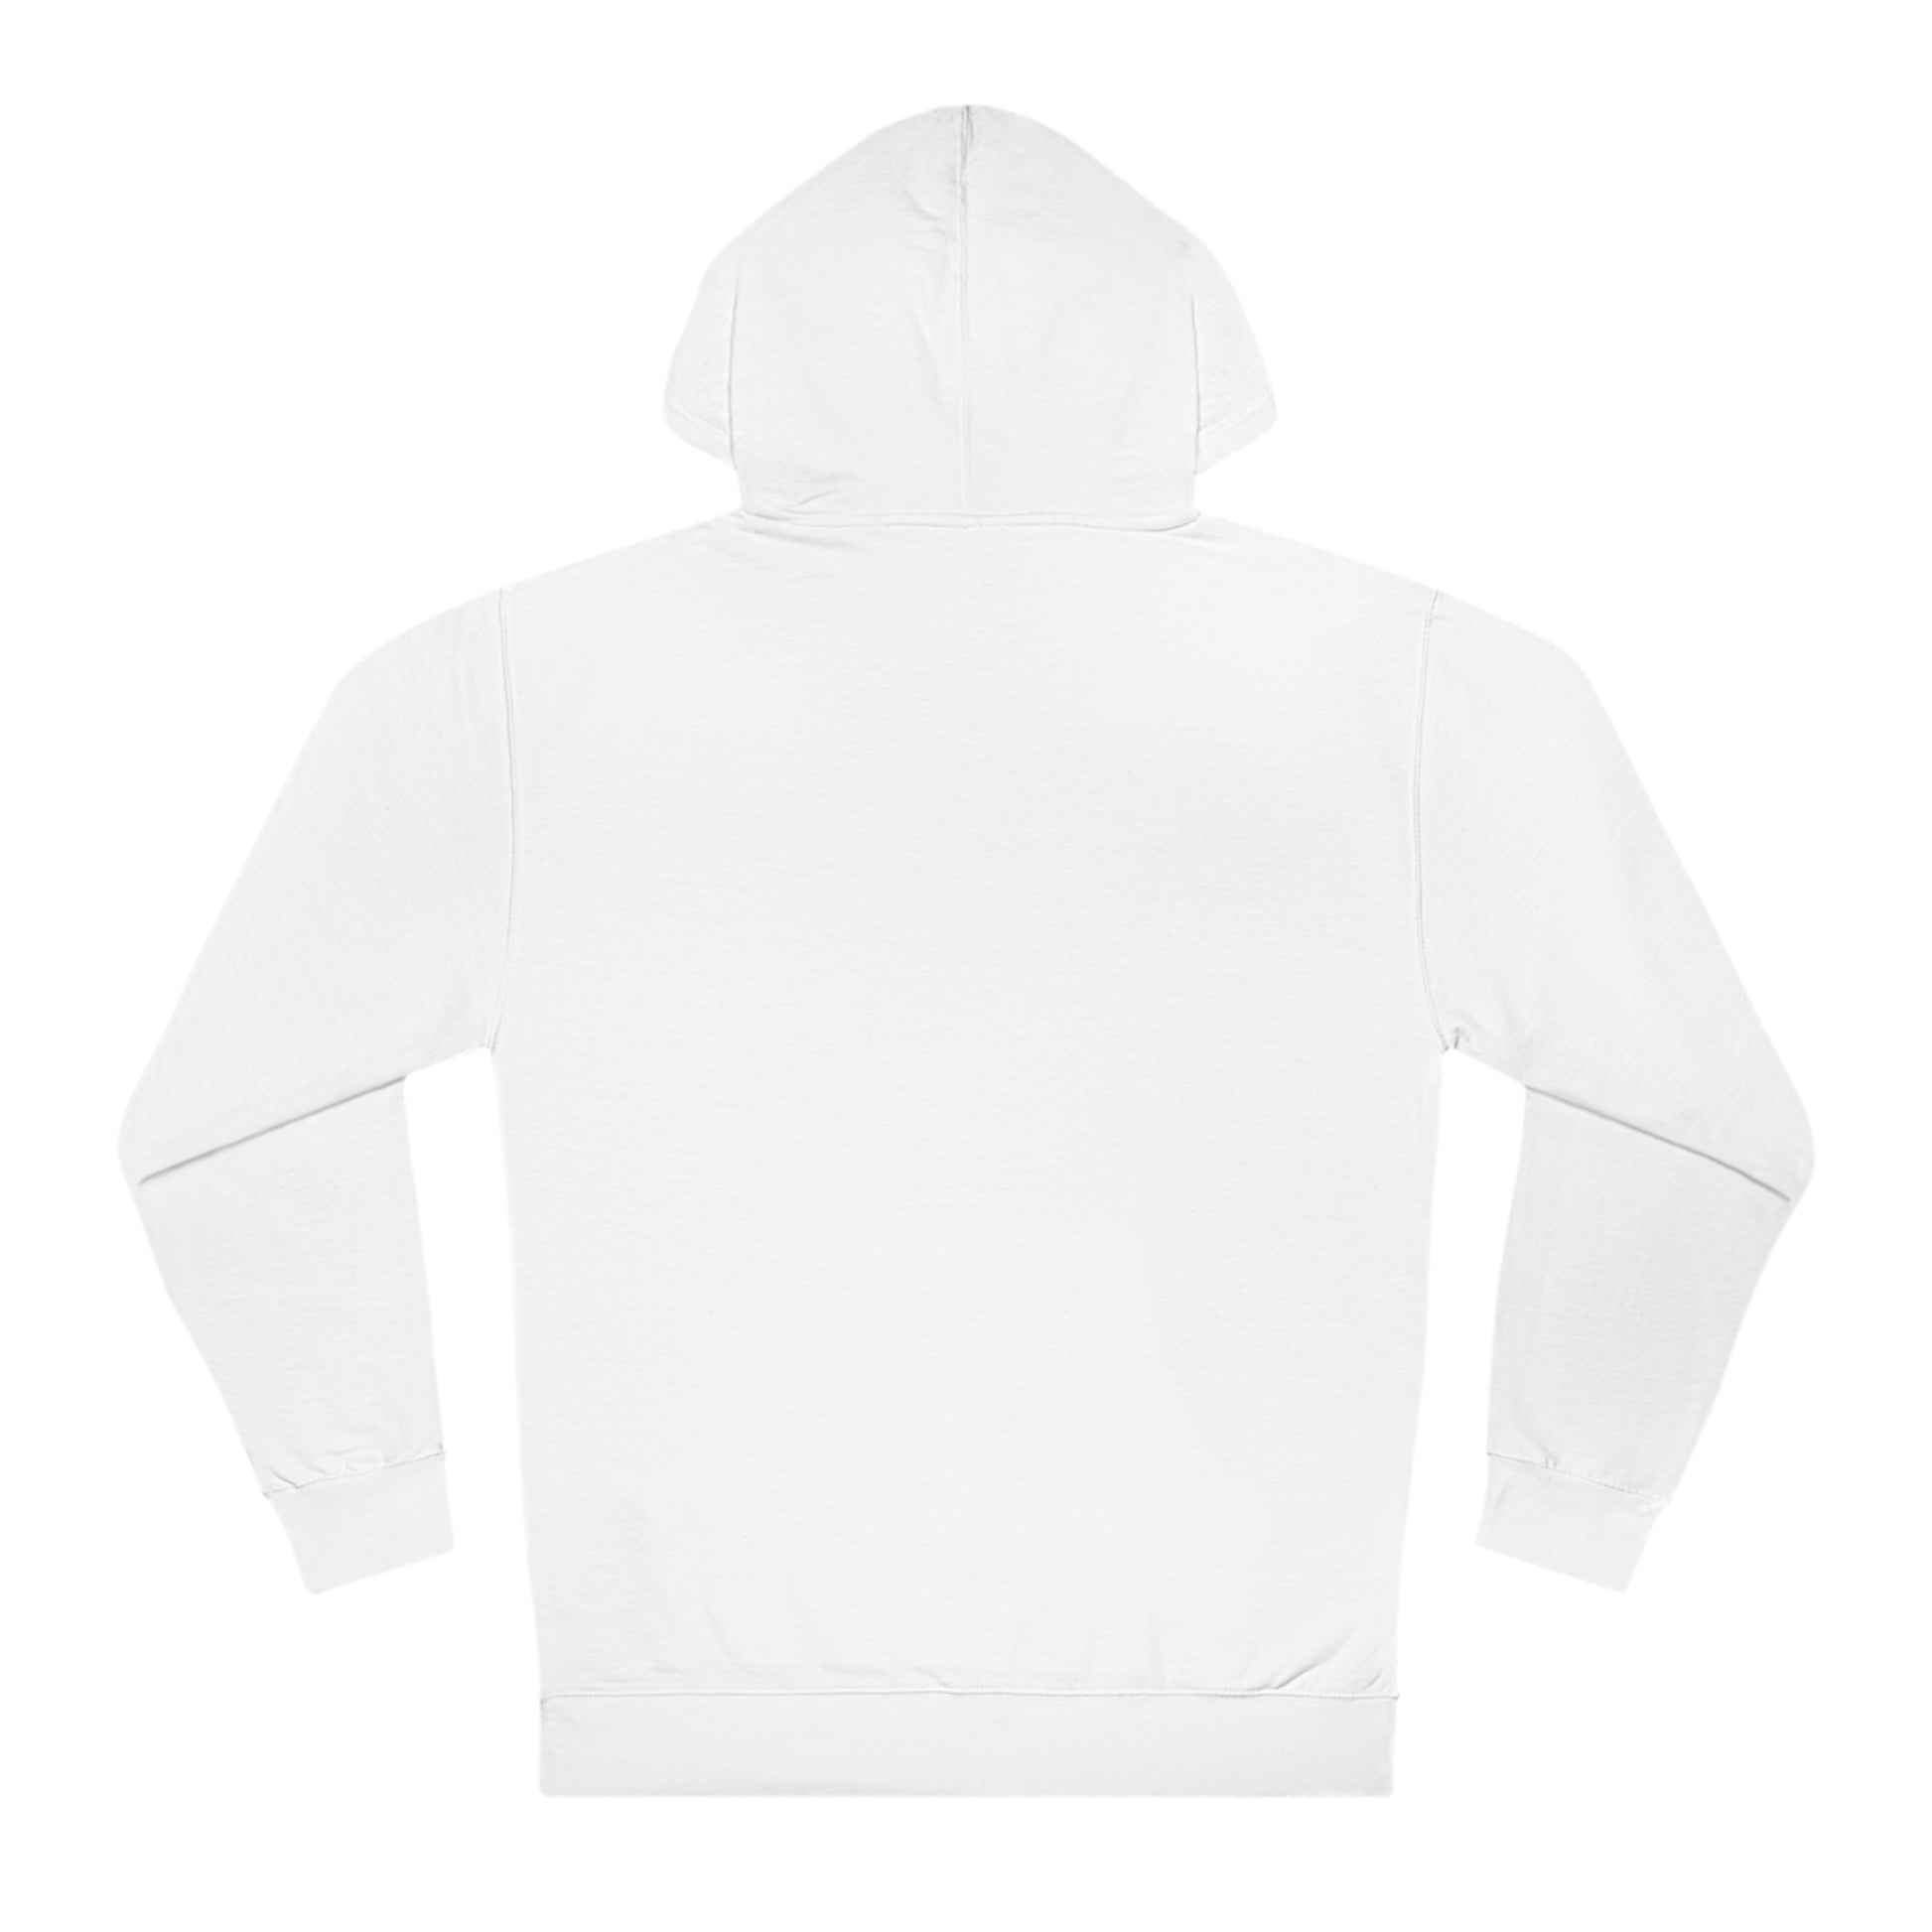 Warm and stylish hoodie for men and women